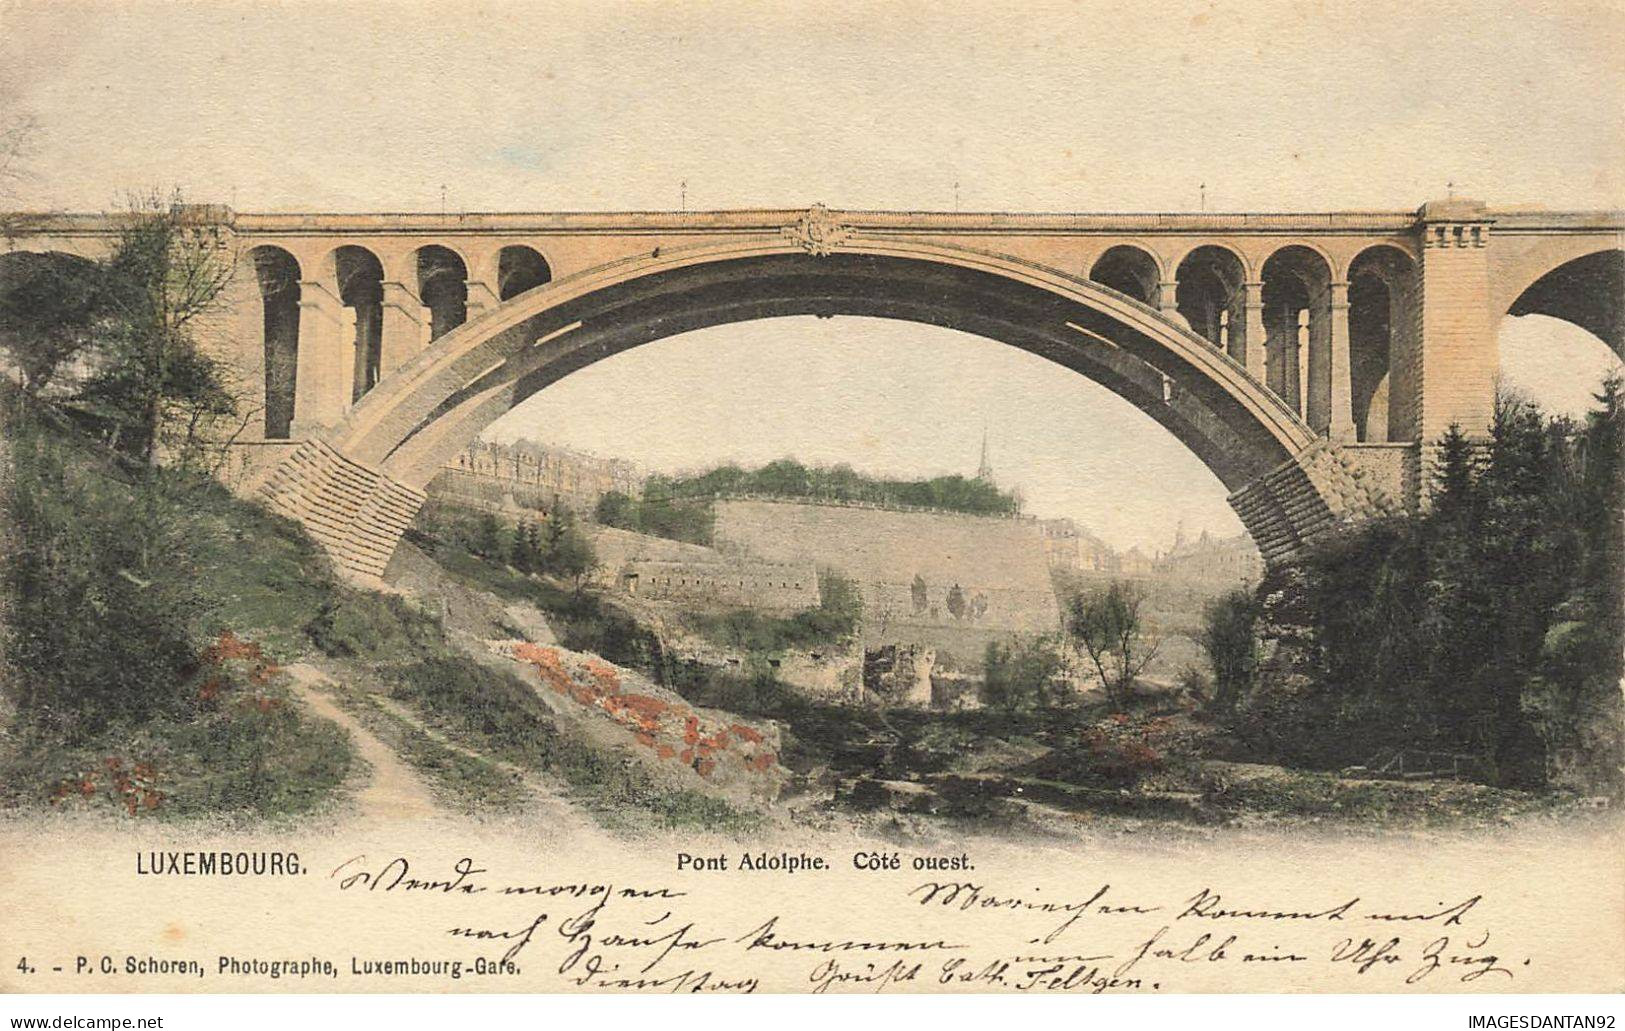 LUXEMBOURG #AS31415 PONT ADOLPHE COTE OUEST LUXEMBOURG - Luxembourg - Ville